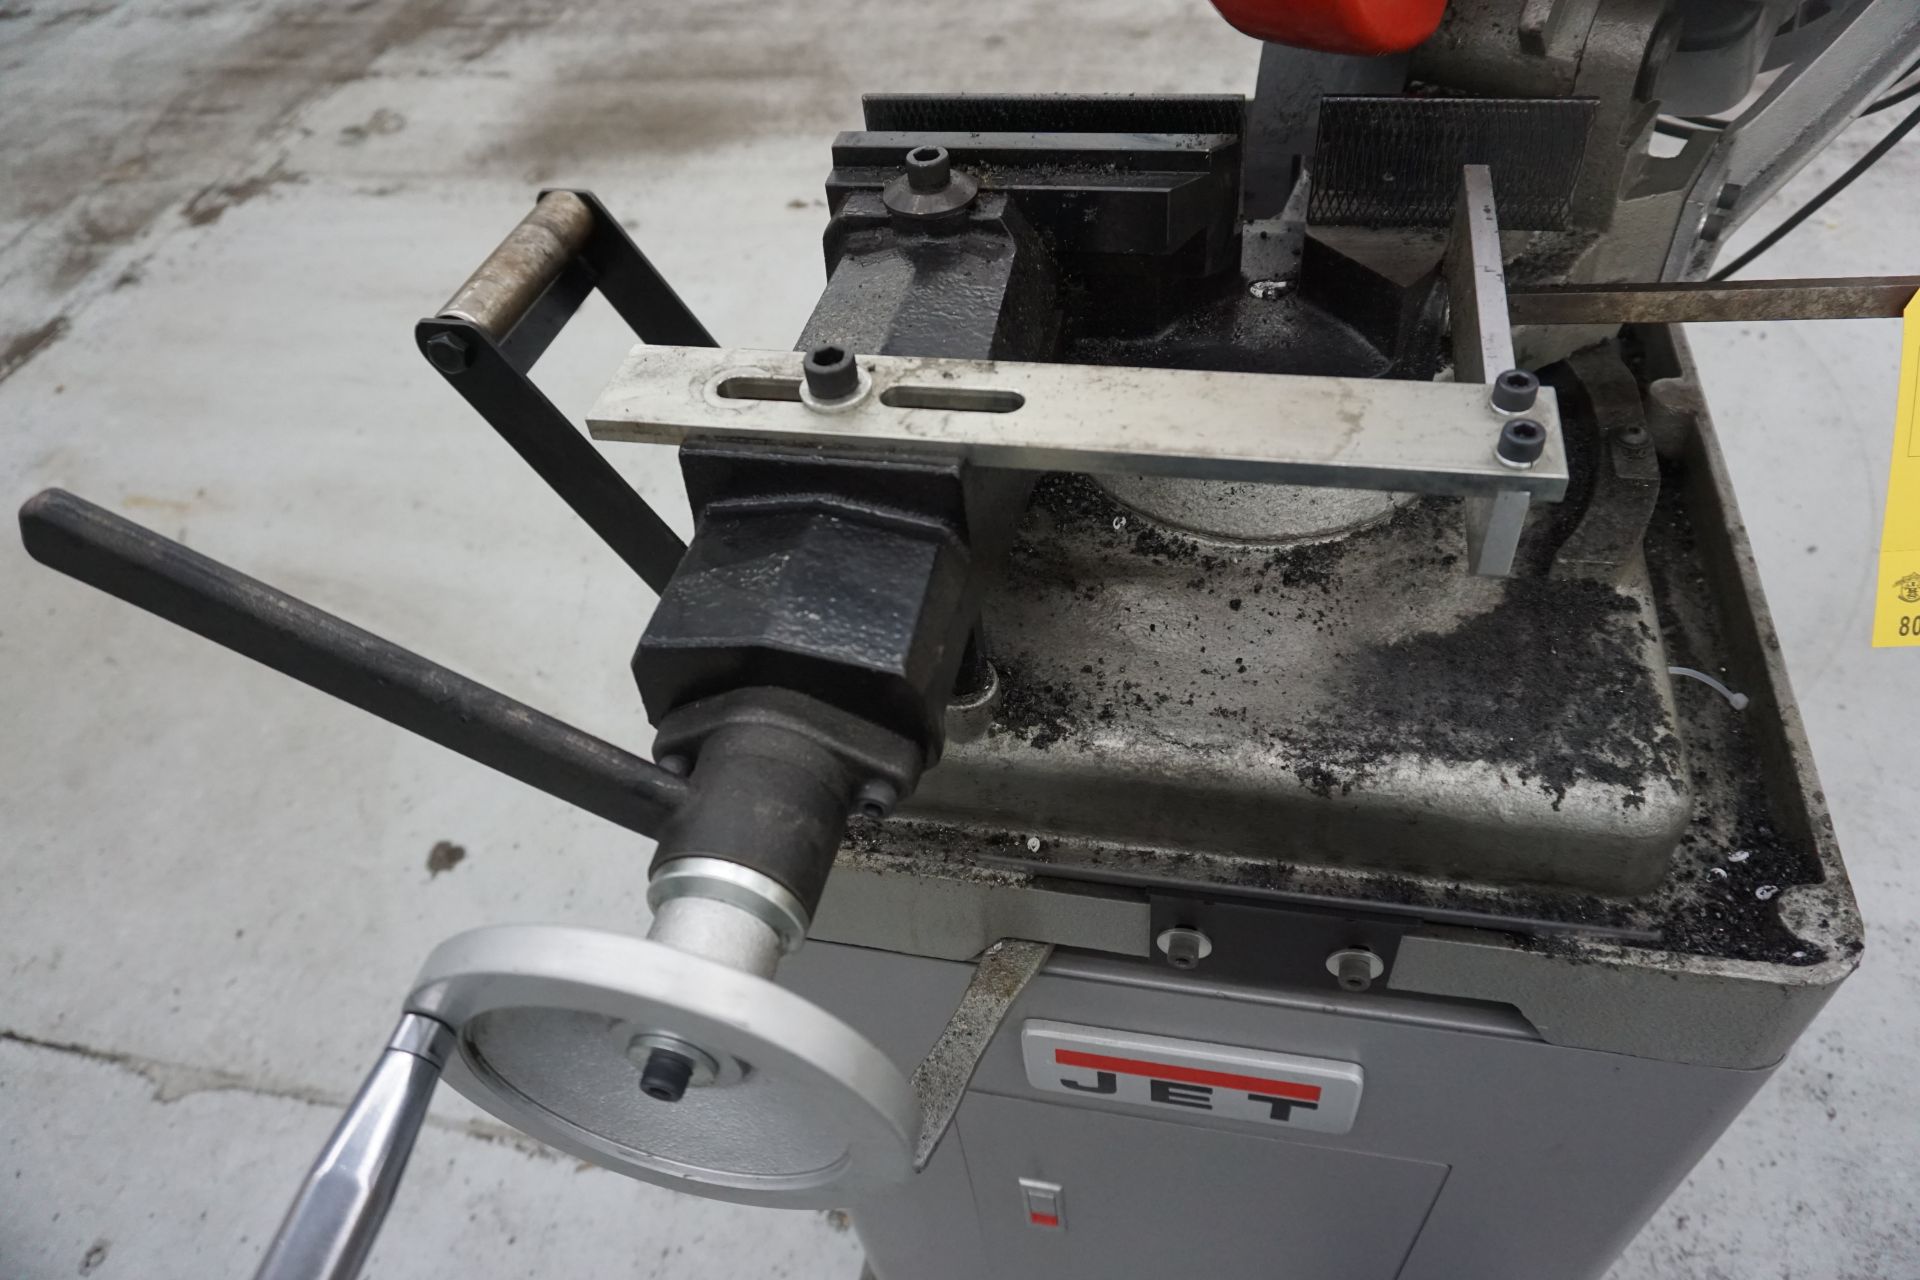 JET 275MM MANUAL FERROUS COLD SAW, MDL: CS275-1 - Image 3 of 6